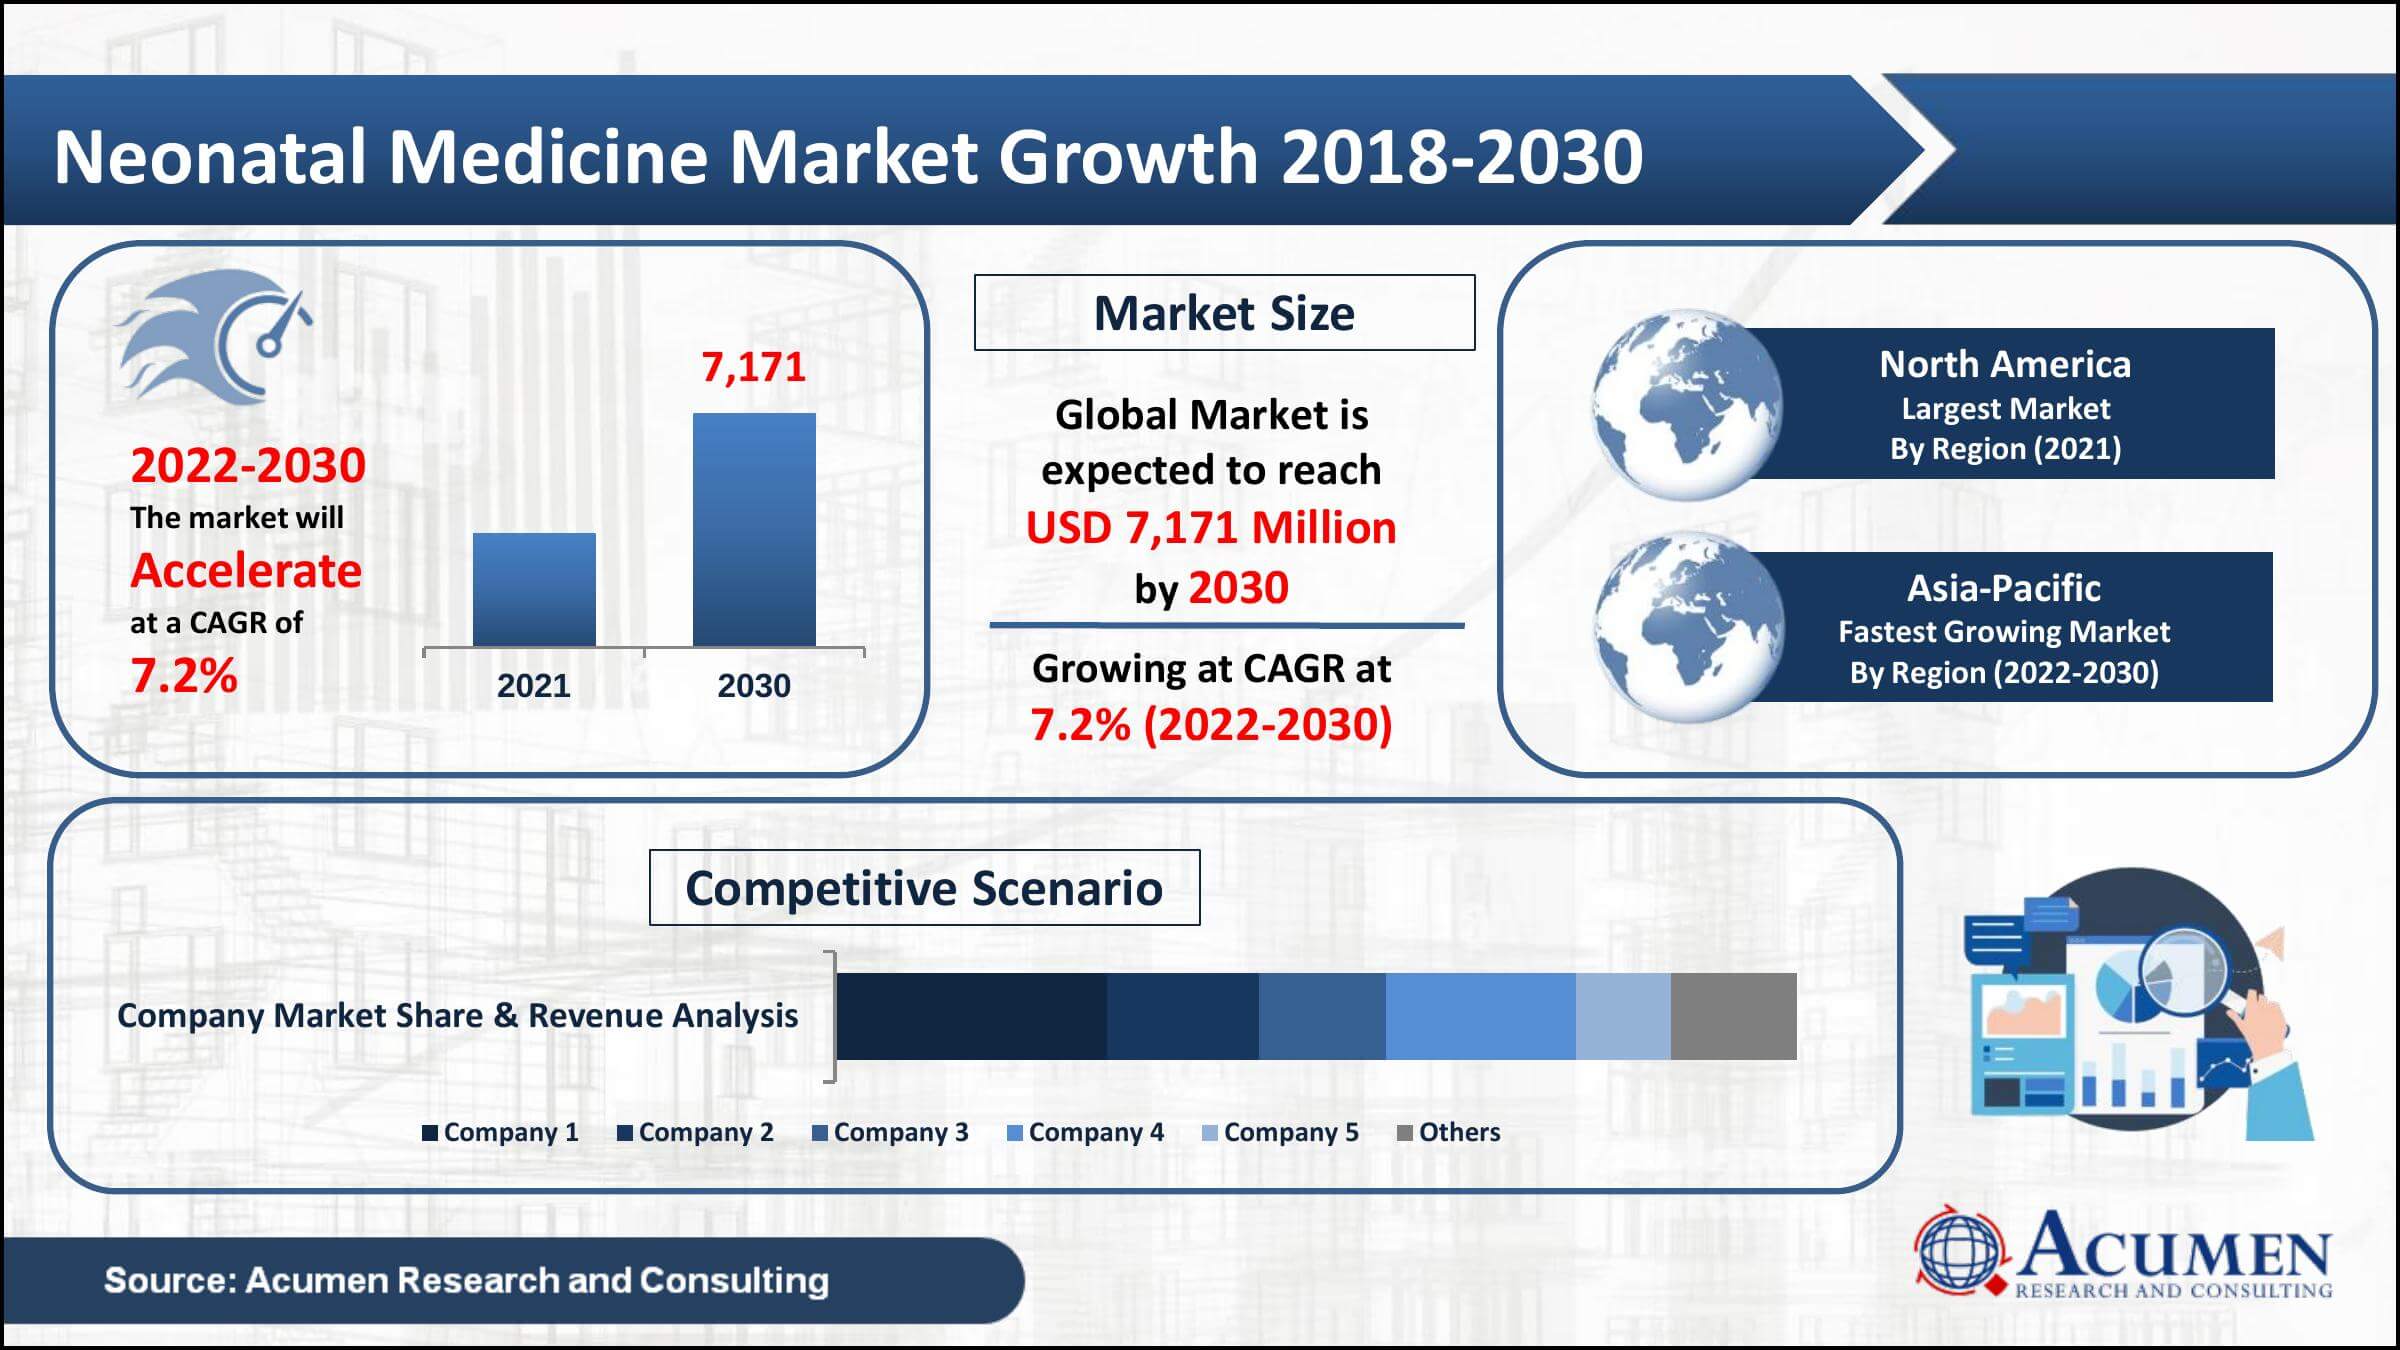 Global neonatal medicine market value was worth USD 3,861 Million in 2021, with a 7.2% CAGR from 2022 to 2030